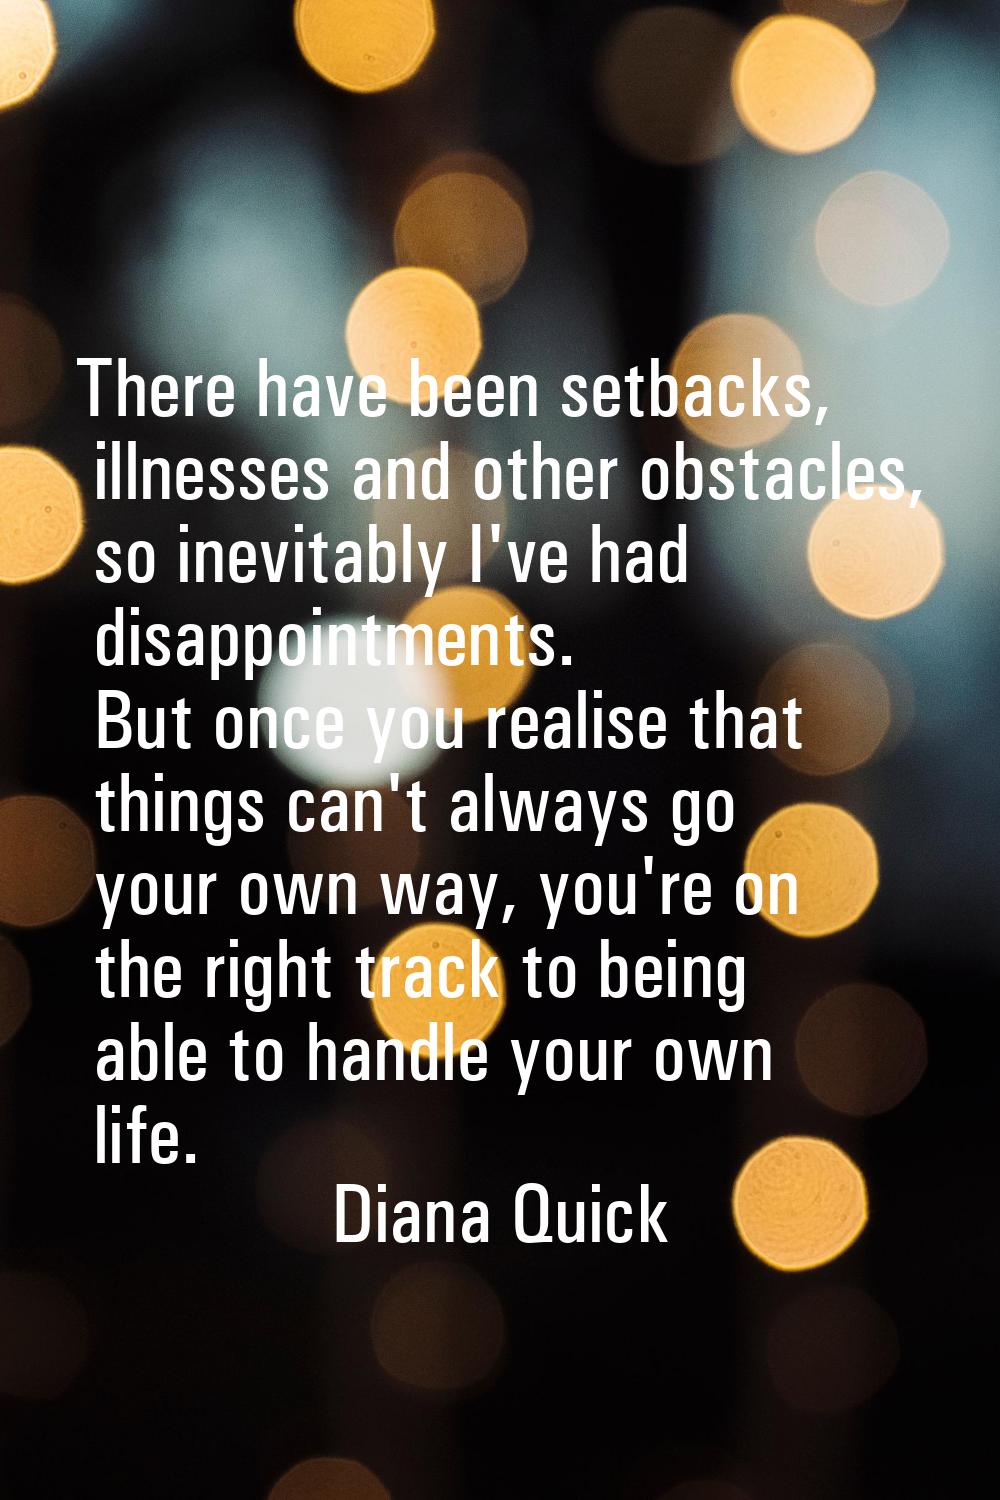 There have been setbacks, illnesses and other obstacles, so inevitably I've had disappointments. Bu